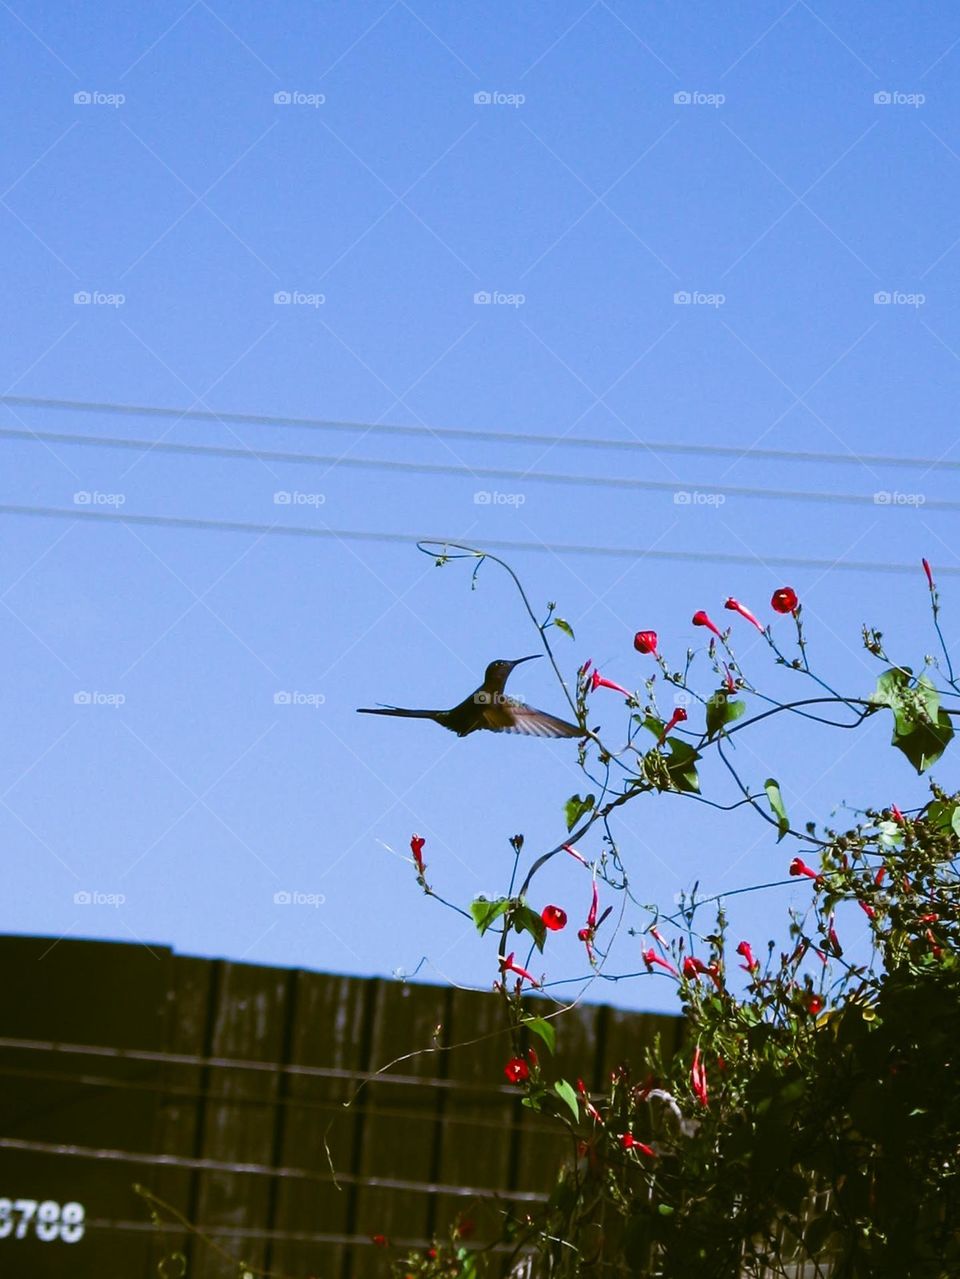 Green Hummingbird flying in front of red flowers to feed, hovering. Beautiful bird, urban wildlife.